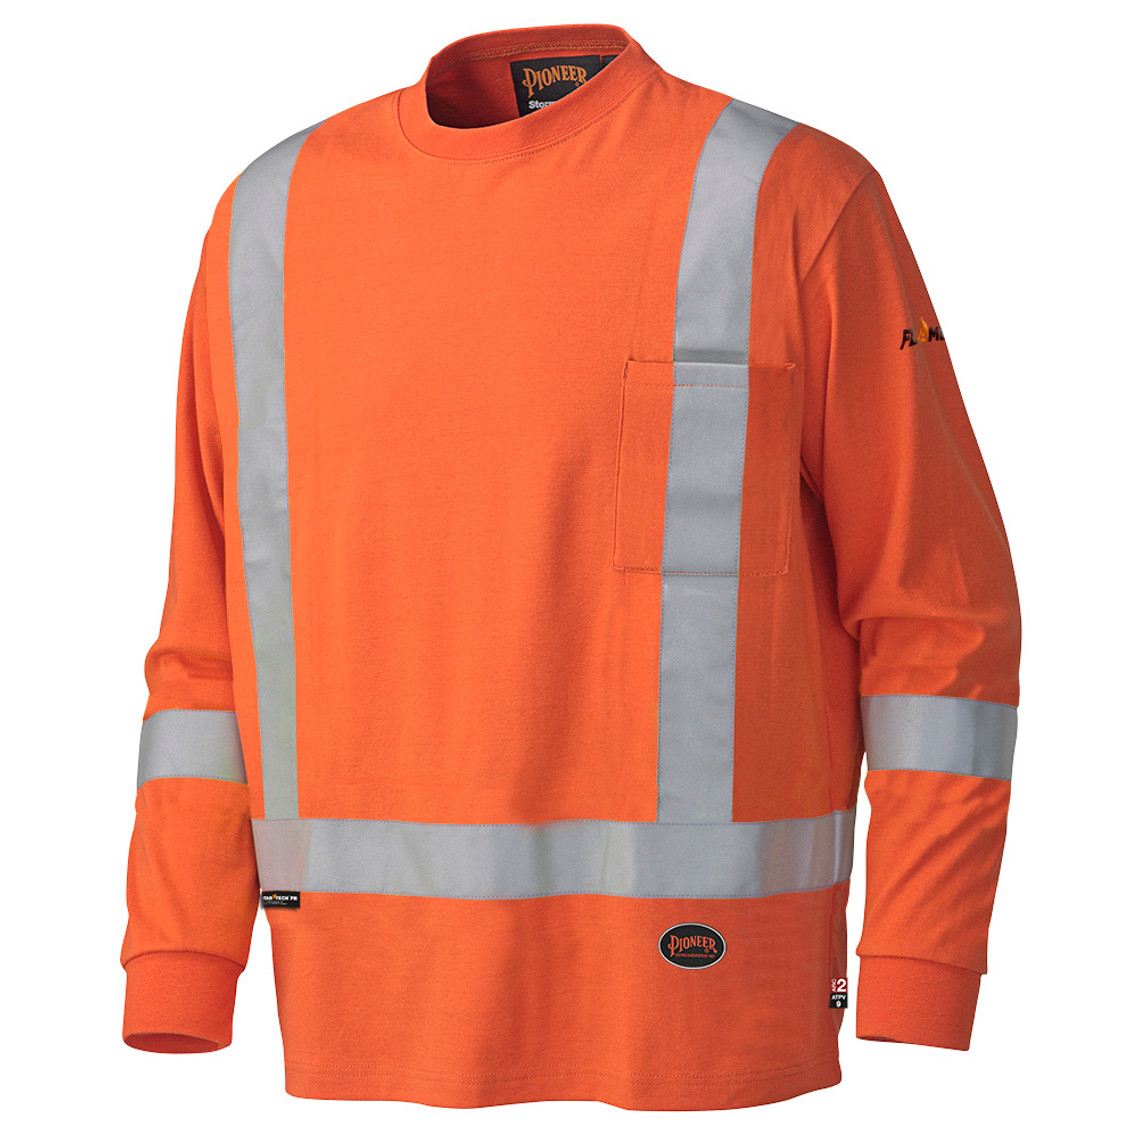 Pioneer 339SFA Flame Resistant/ARC Rated Long Sleeve Safety Shirt - Orange | Safetywear.ca